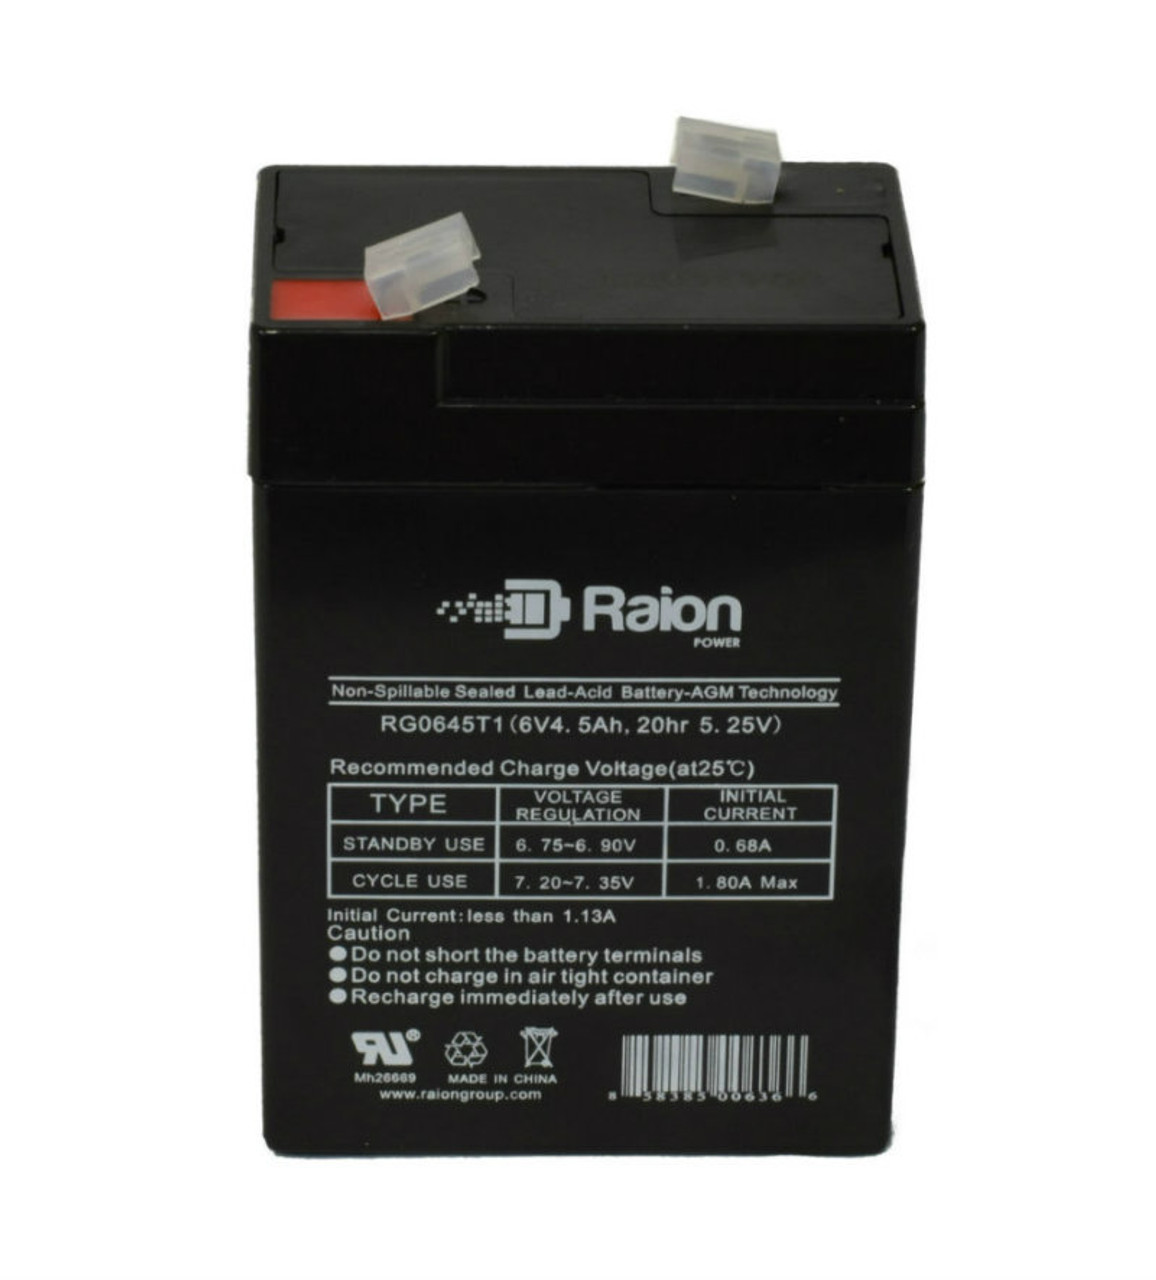 Raion Power RG0645T1 Replacement Battery Cartridge for Baxter Healthcare 522 Cardiac Output Computer